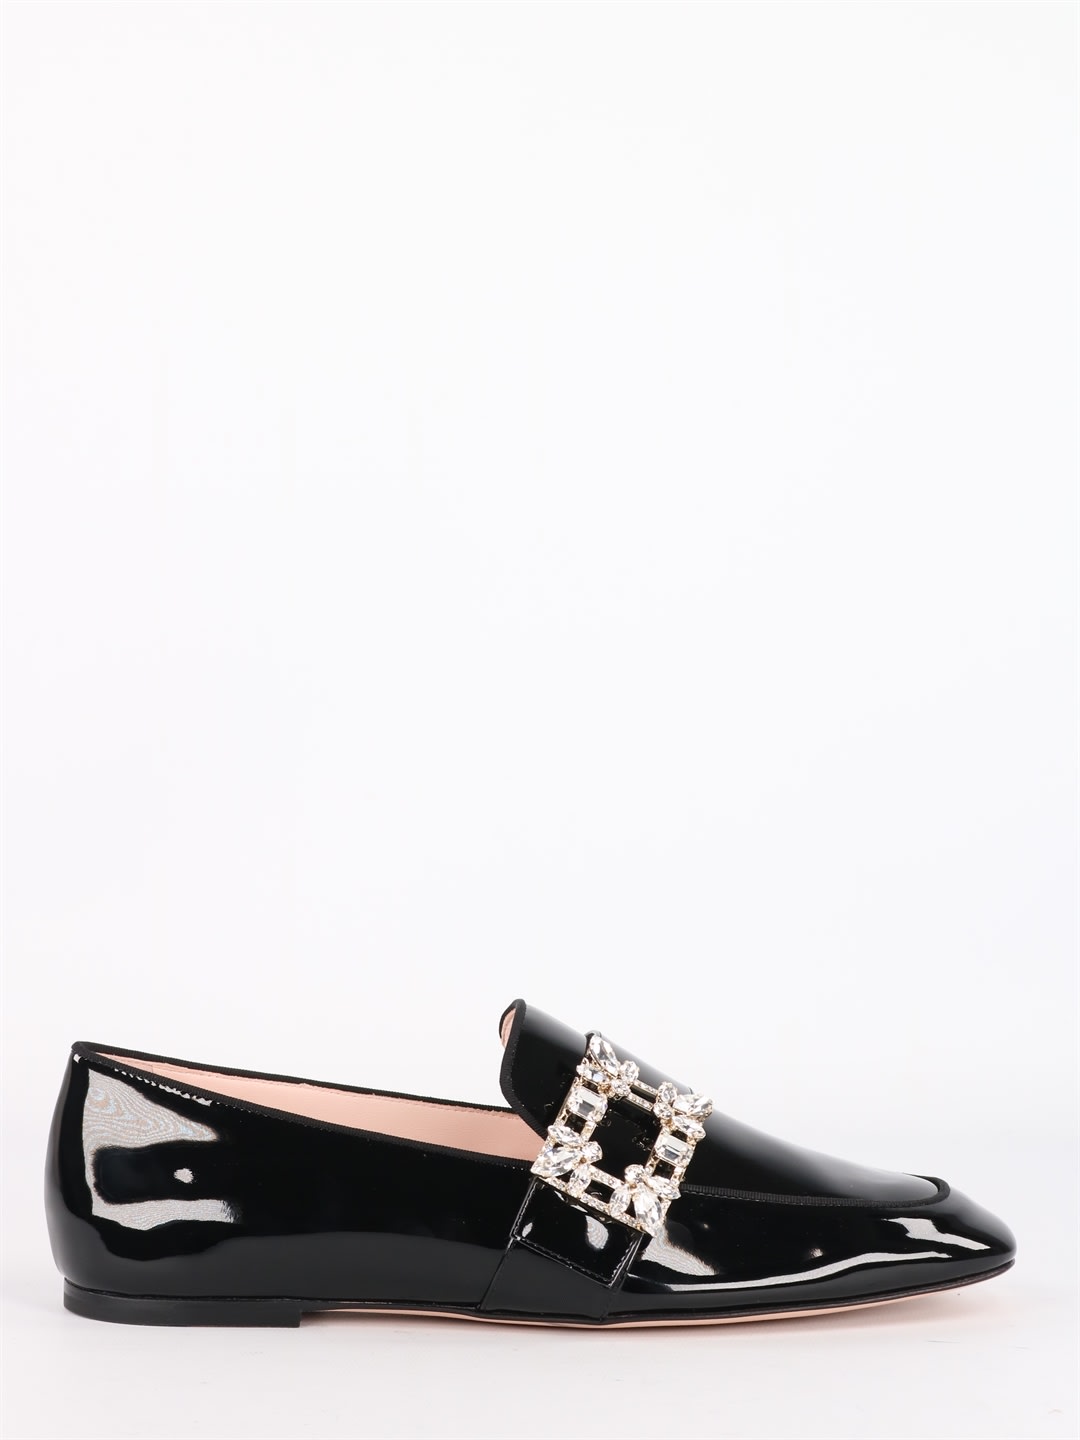 Roger Vivier Black Patent Leather Loafers